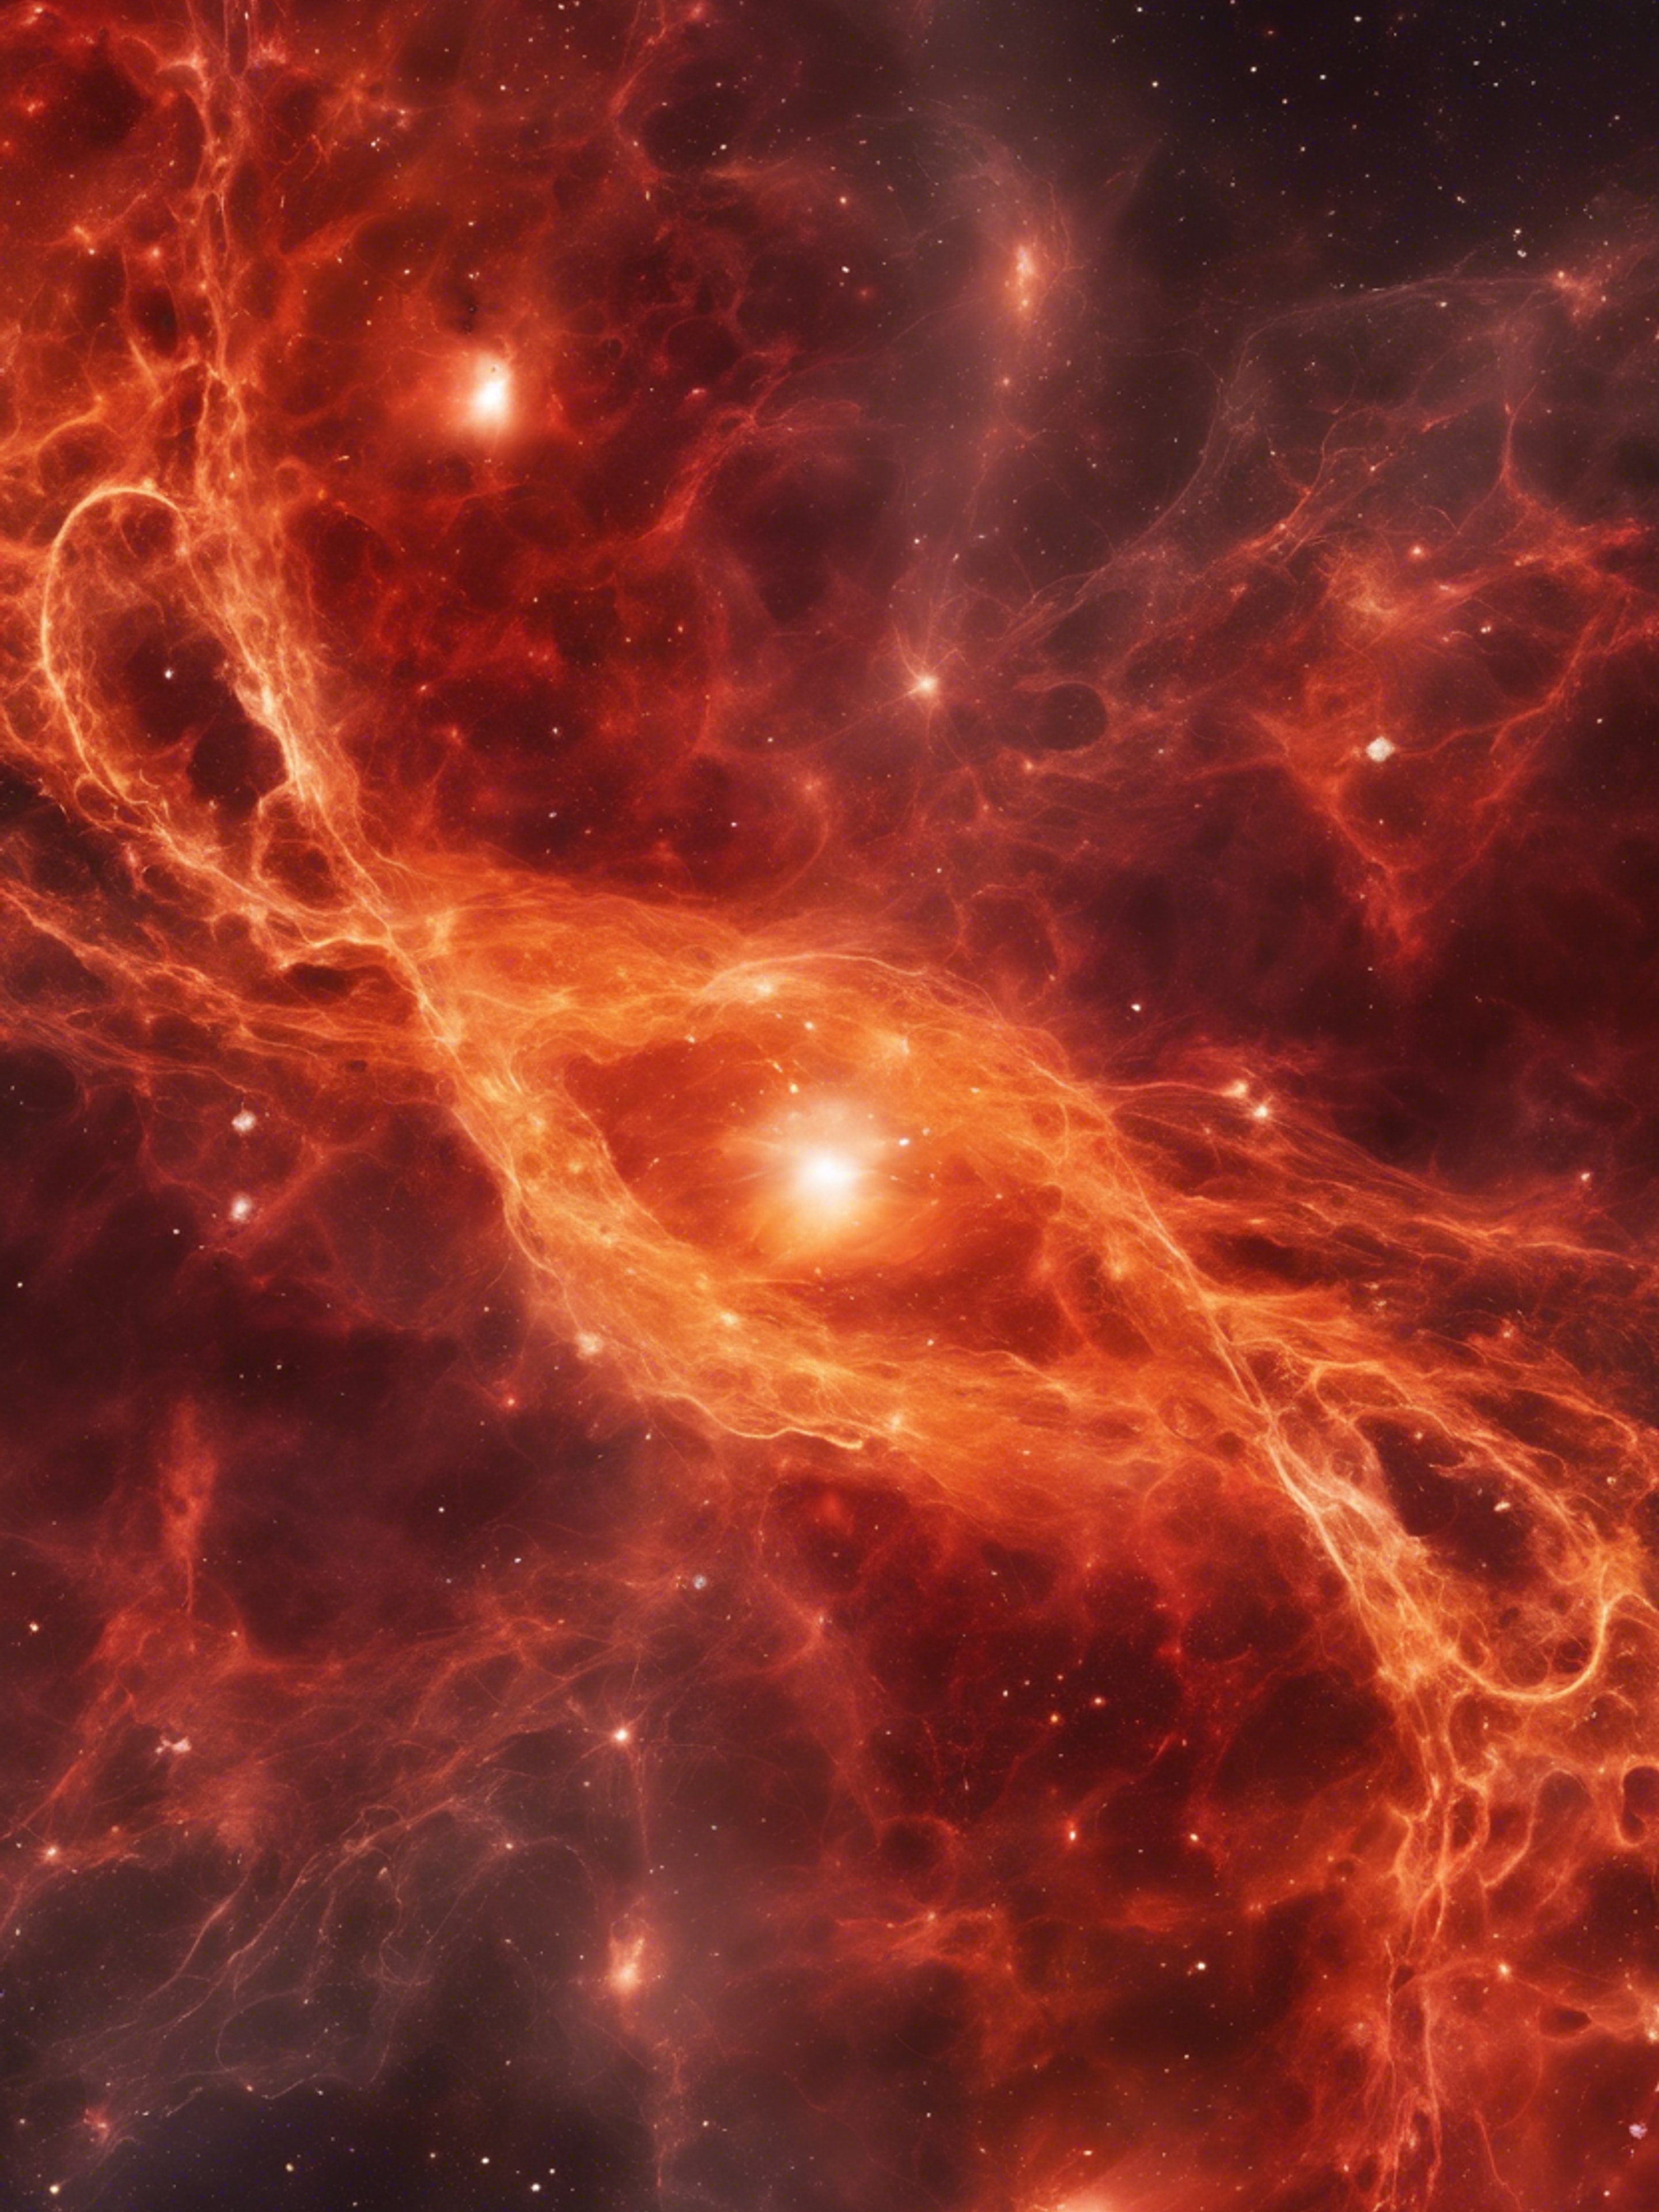 Red and orange nebula moving in chaos to form an alluring abstract pattern, lost in an endless loop. Wallpaper[8b81d5815a2d445c9bb4]